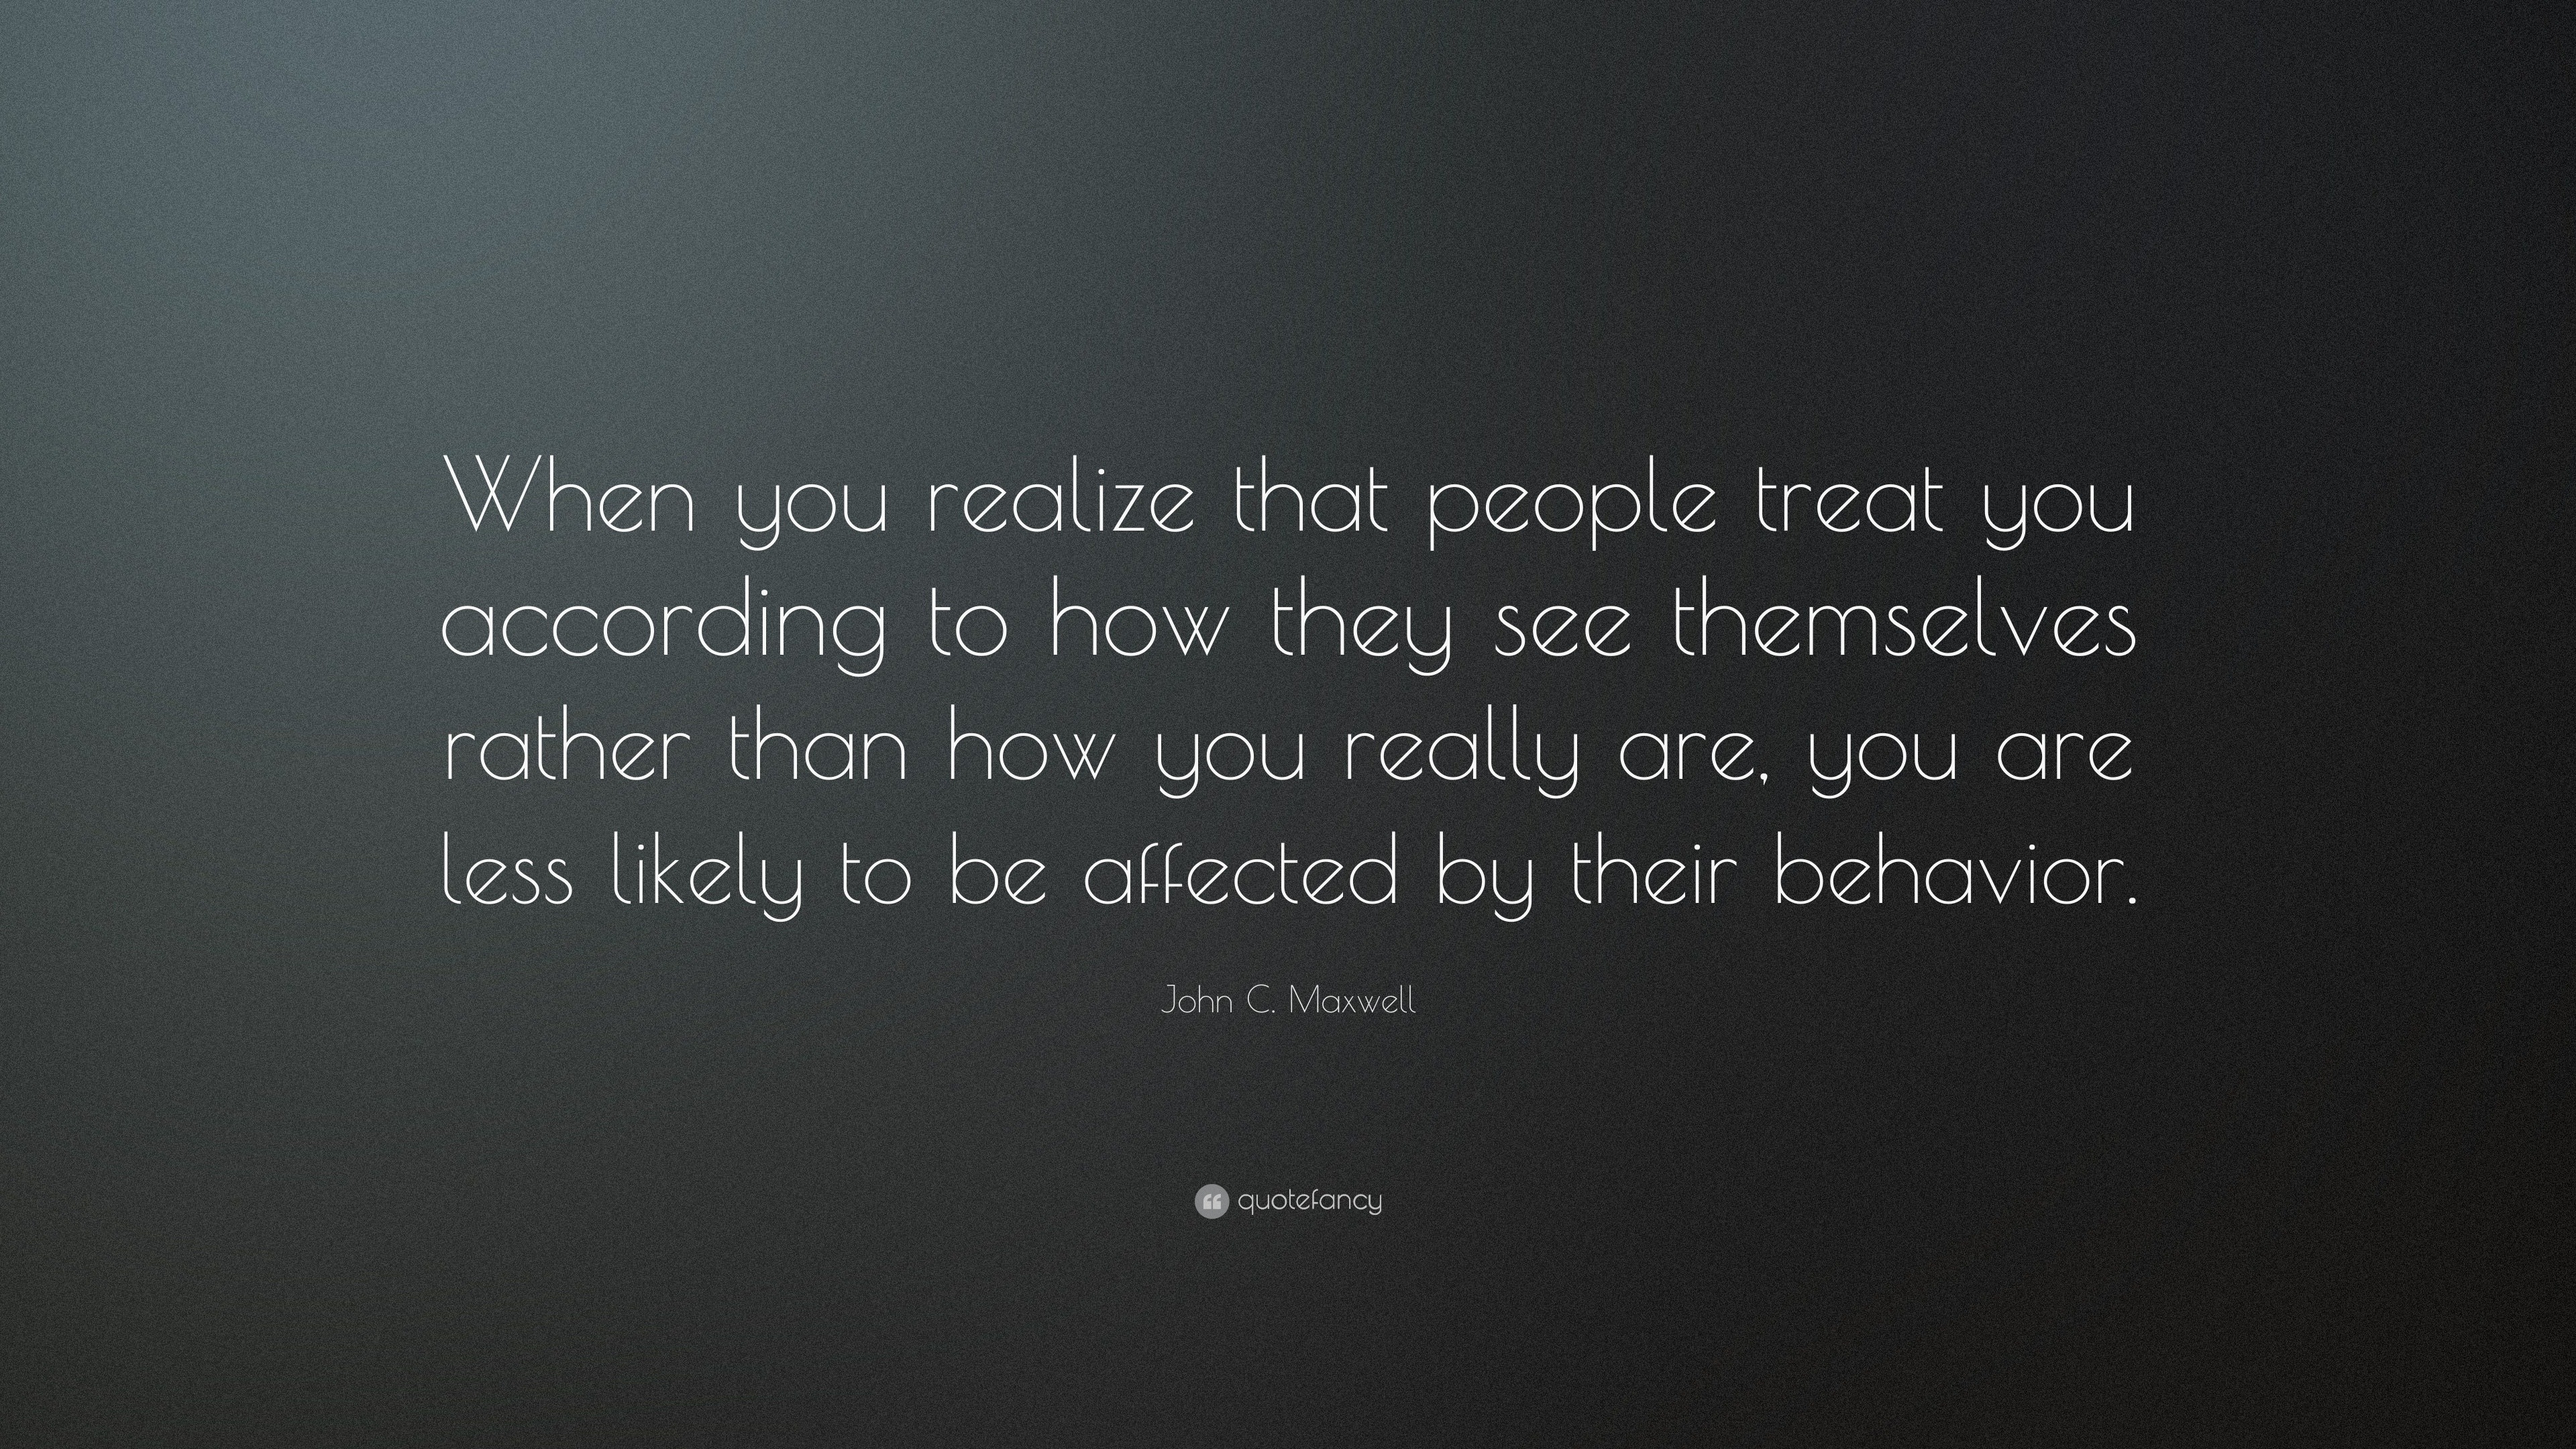 John C. Maxwell Quote: “When you realize that people treat you ...